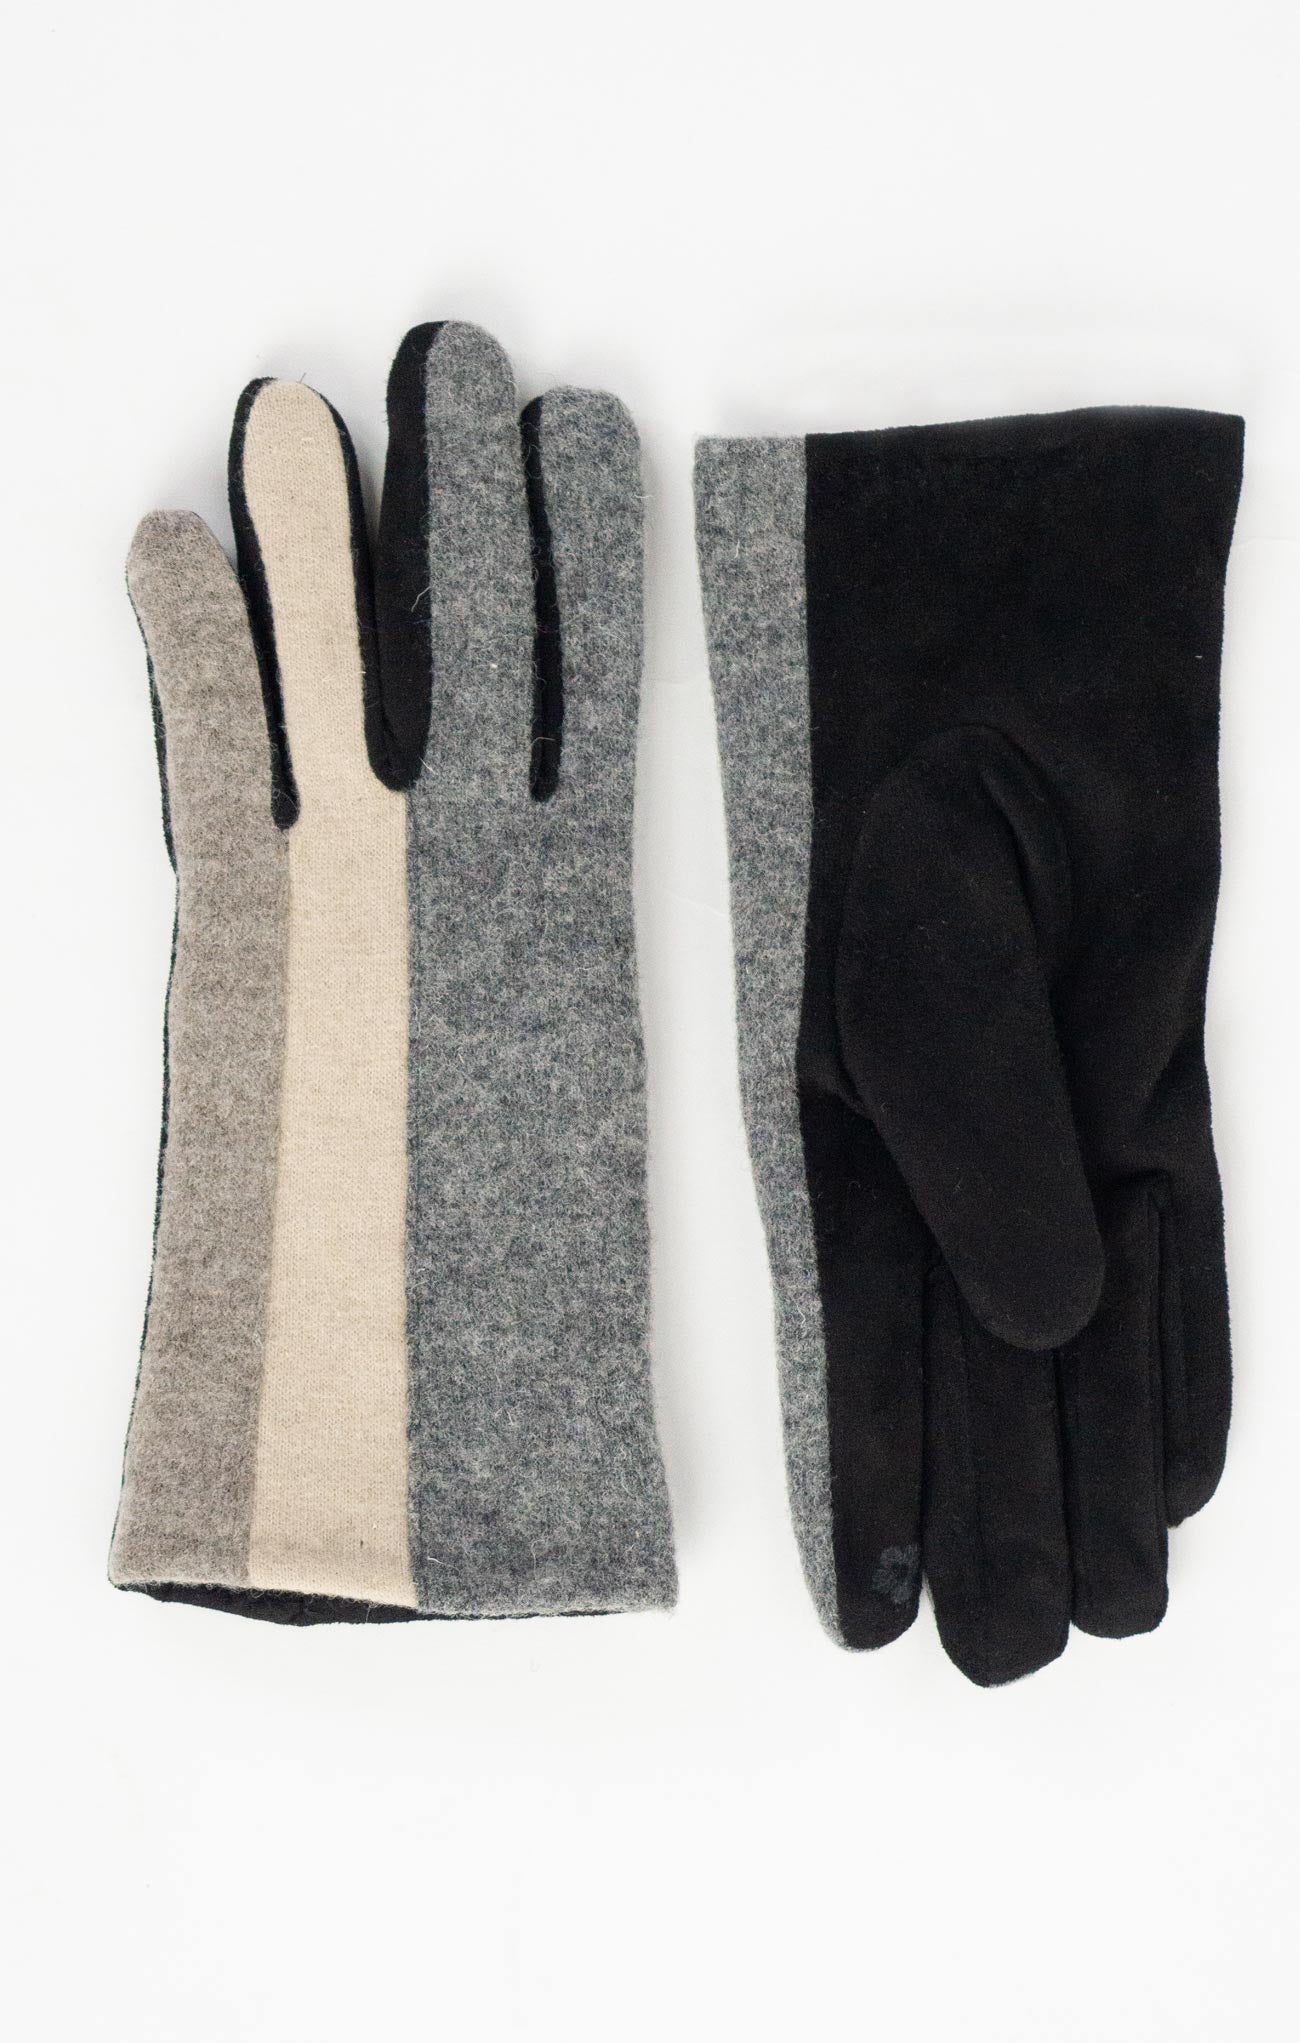 MINIMAL COLOR BLOCK GLOVES-taupe,stripes with different colors,black suede on inside of glove